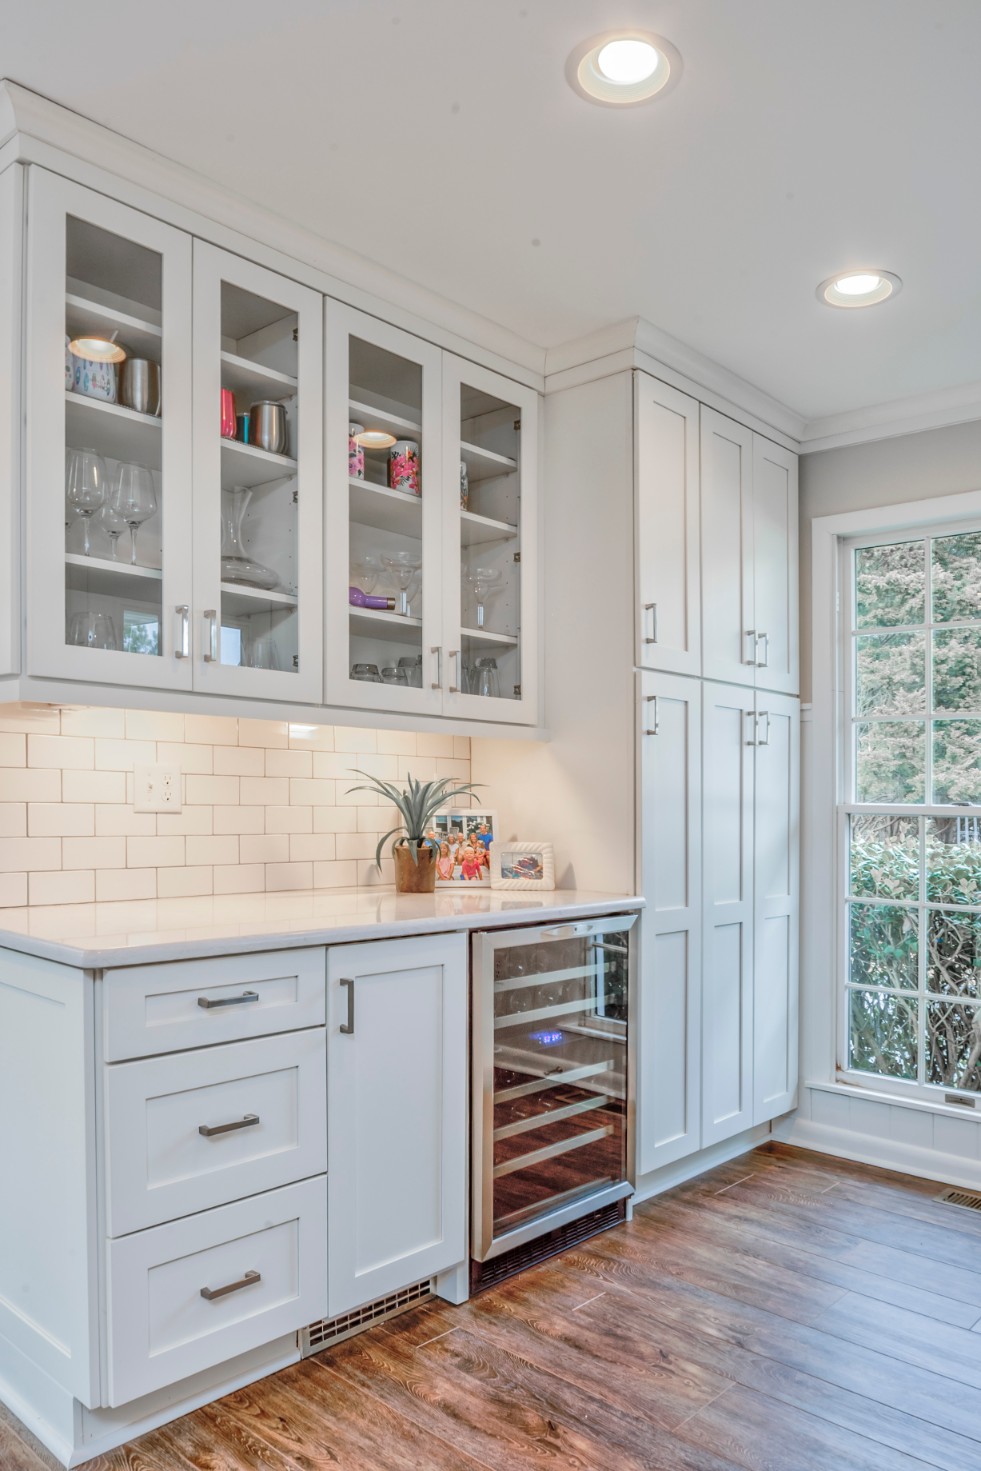 Canal Way Renovation in Bethany Beach DE - Kitchen with Wine Cooler and White Subway Tile Backsplash